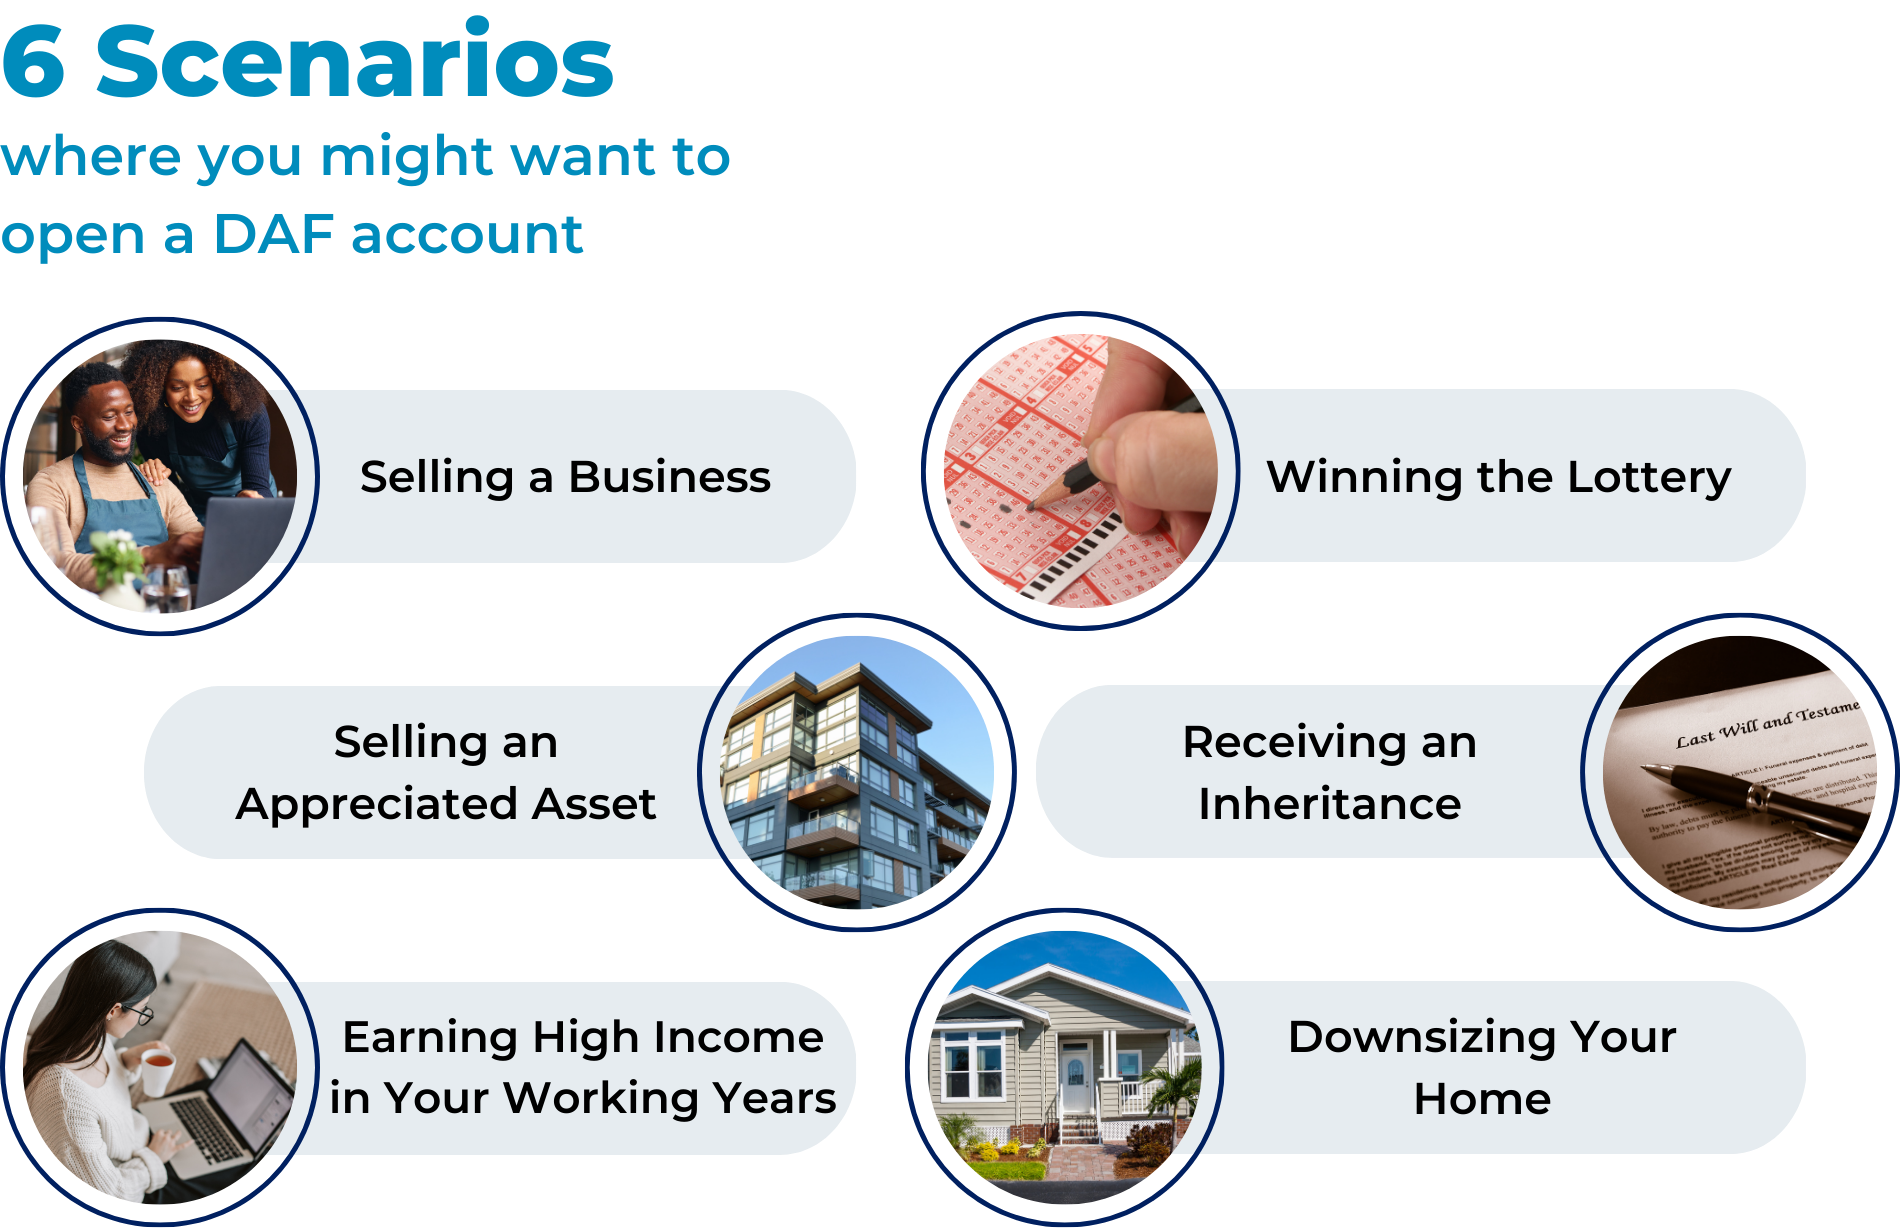 An infographic outlining six scenarios in which you may want a DAF account, including lottery wins, inheritance, selling a business, etc.